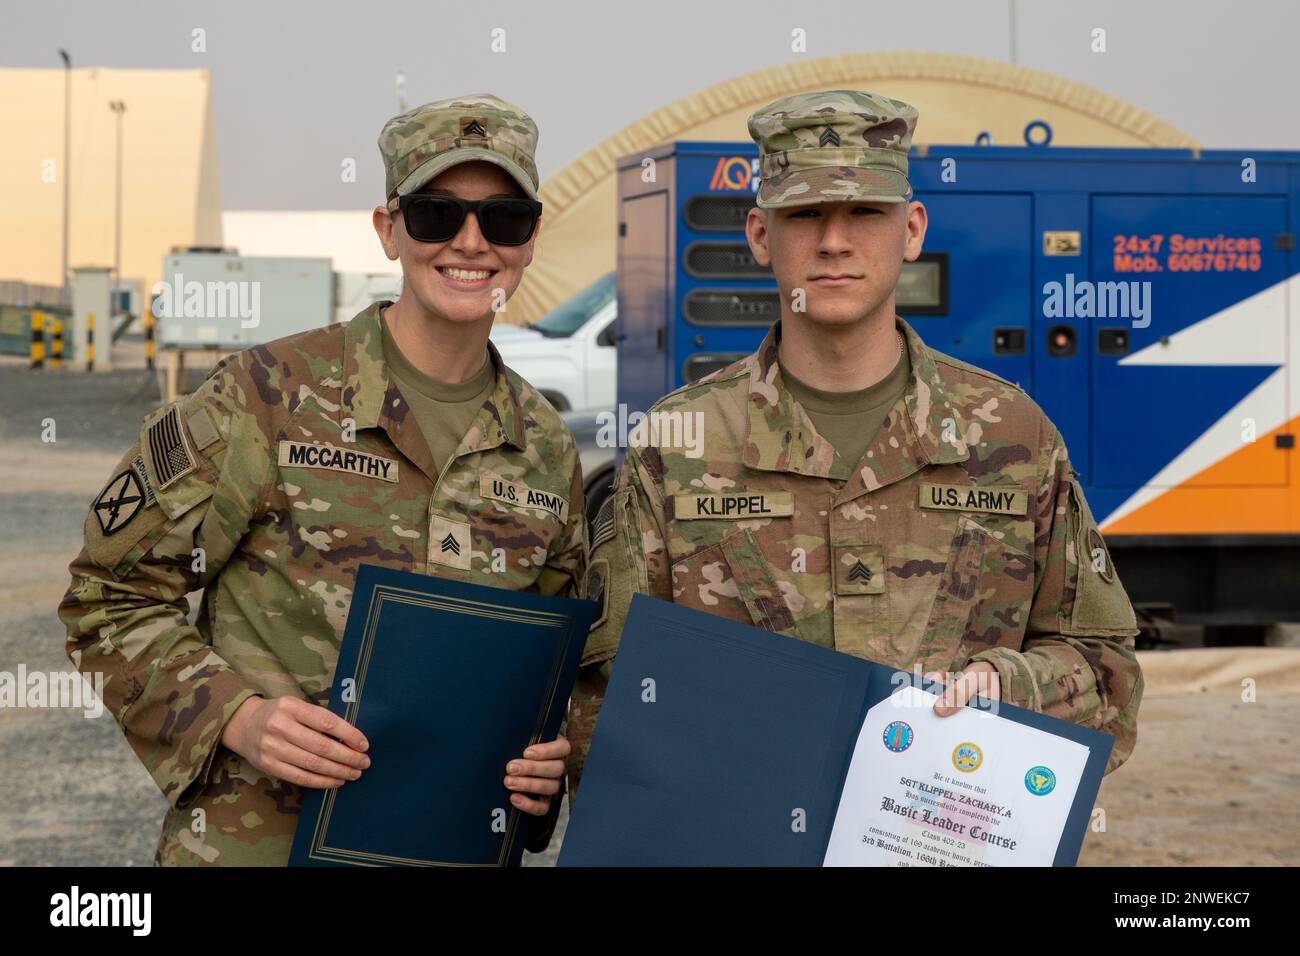 U.S. Army Sgt. Michelle McCarthy poses outside for picture with Sgt. Zachary Klippel after a BLC graduation ceremony held in a theatre tent on Camp Buehring, Kuwait, Jan. 25, 2023. Stock Photo